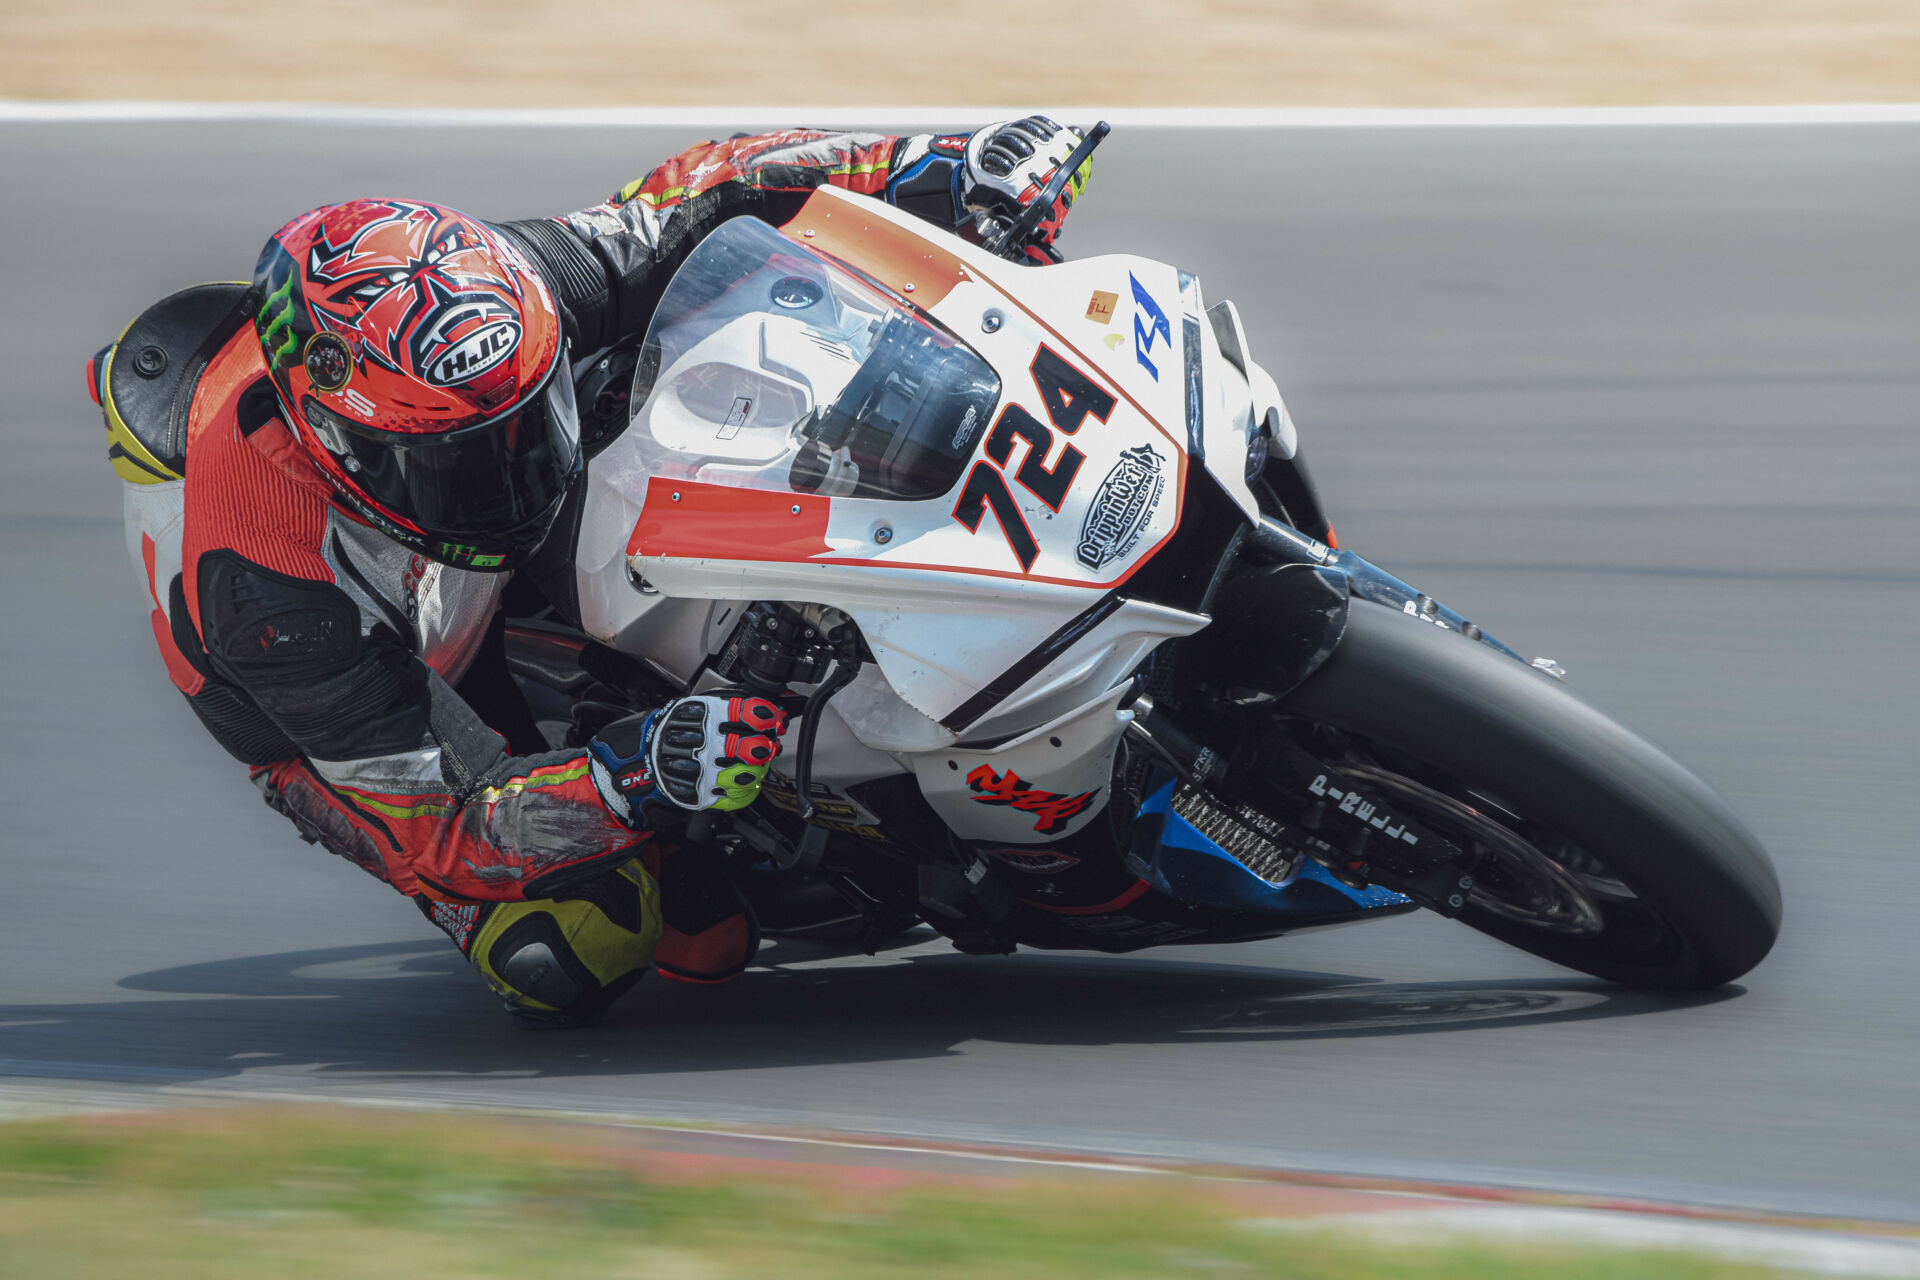 Brian Grasso (724) won the ASRA Superstock race at Summit Point. Photo by Vae Vang/Noiseless Productions, courtesy ASRA.